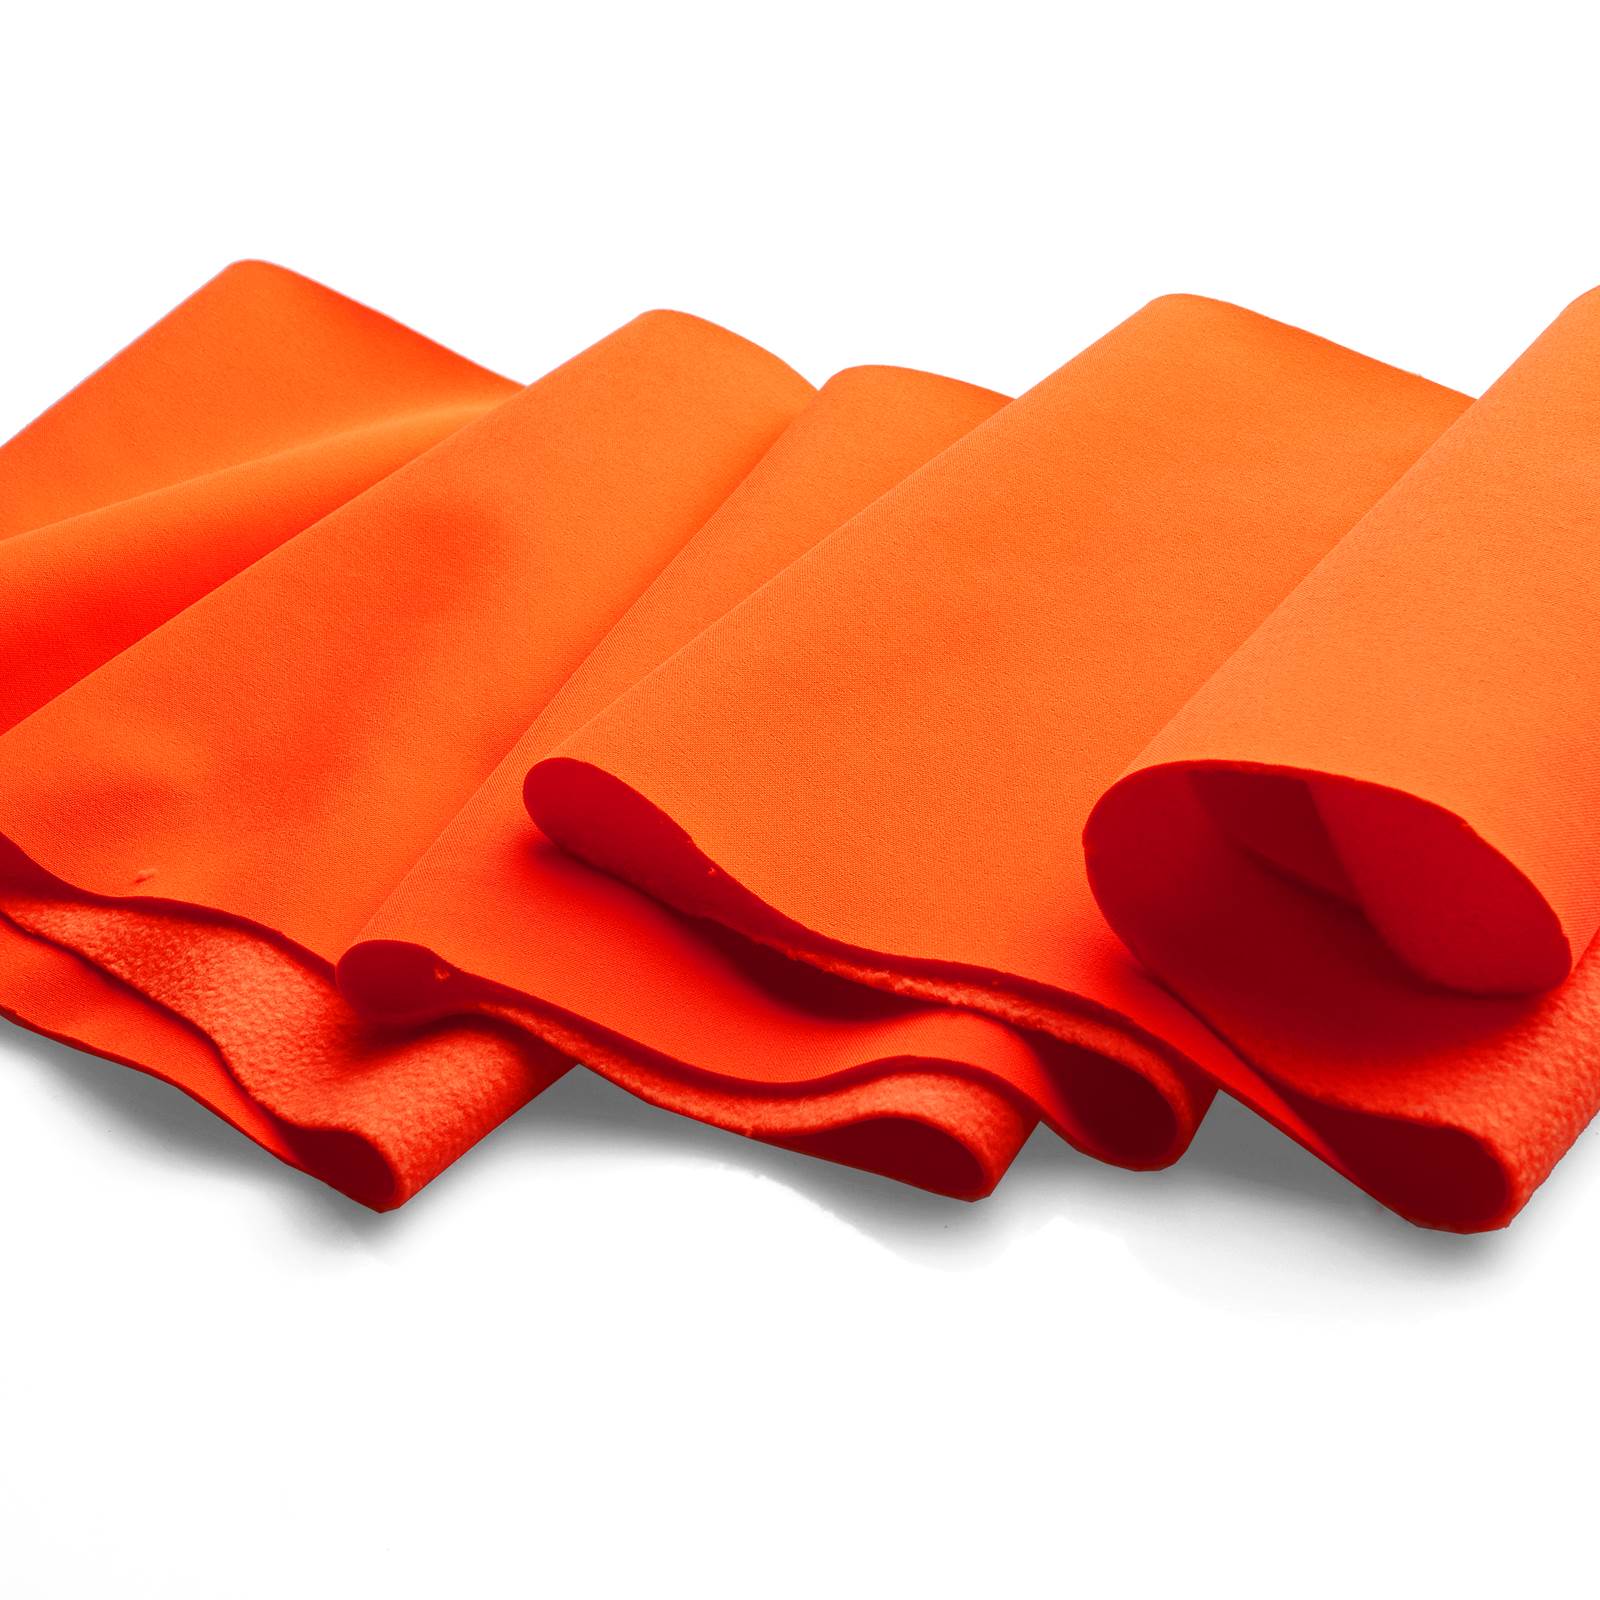 Softshell - coupe-vent, imperméable, thermoactif - orange fluo/néon